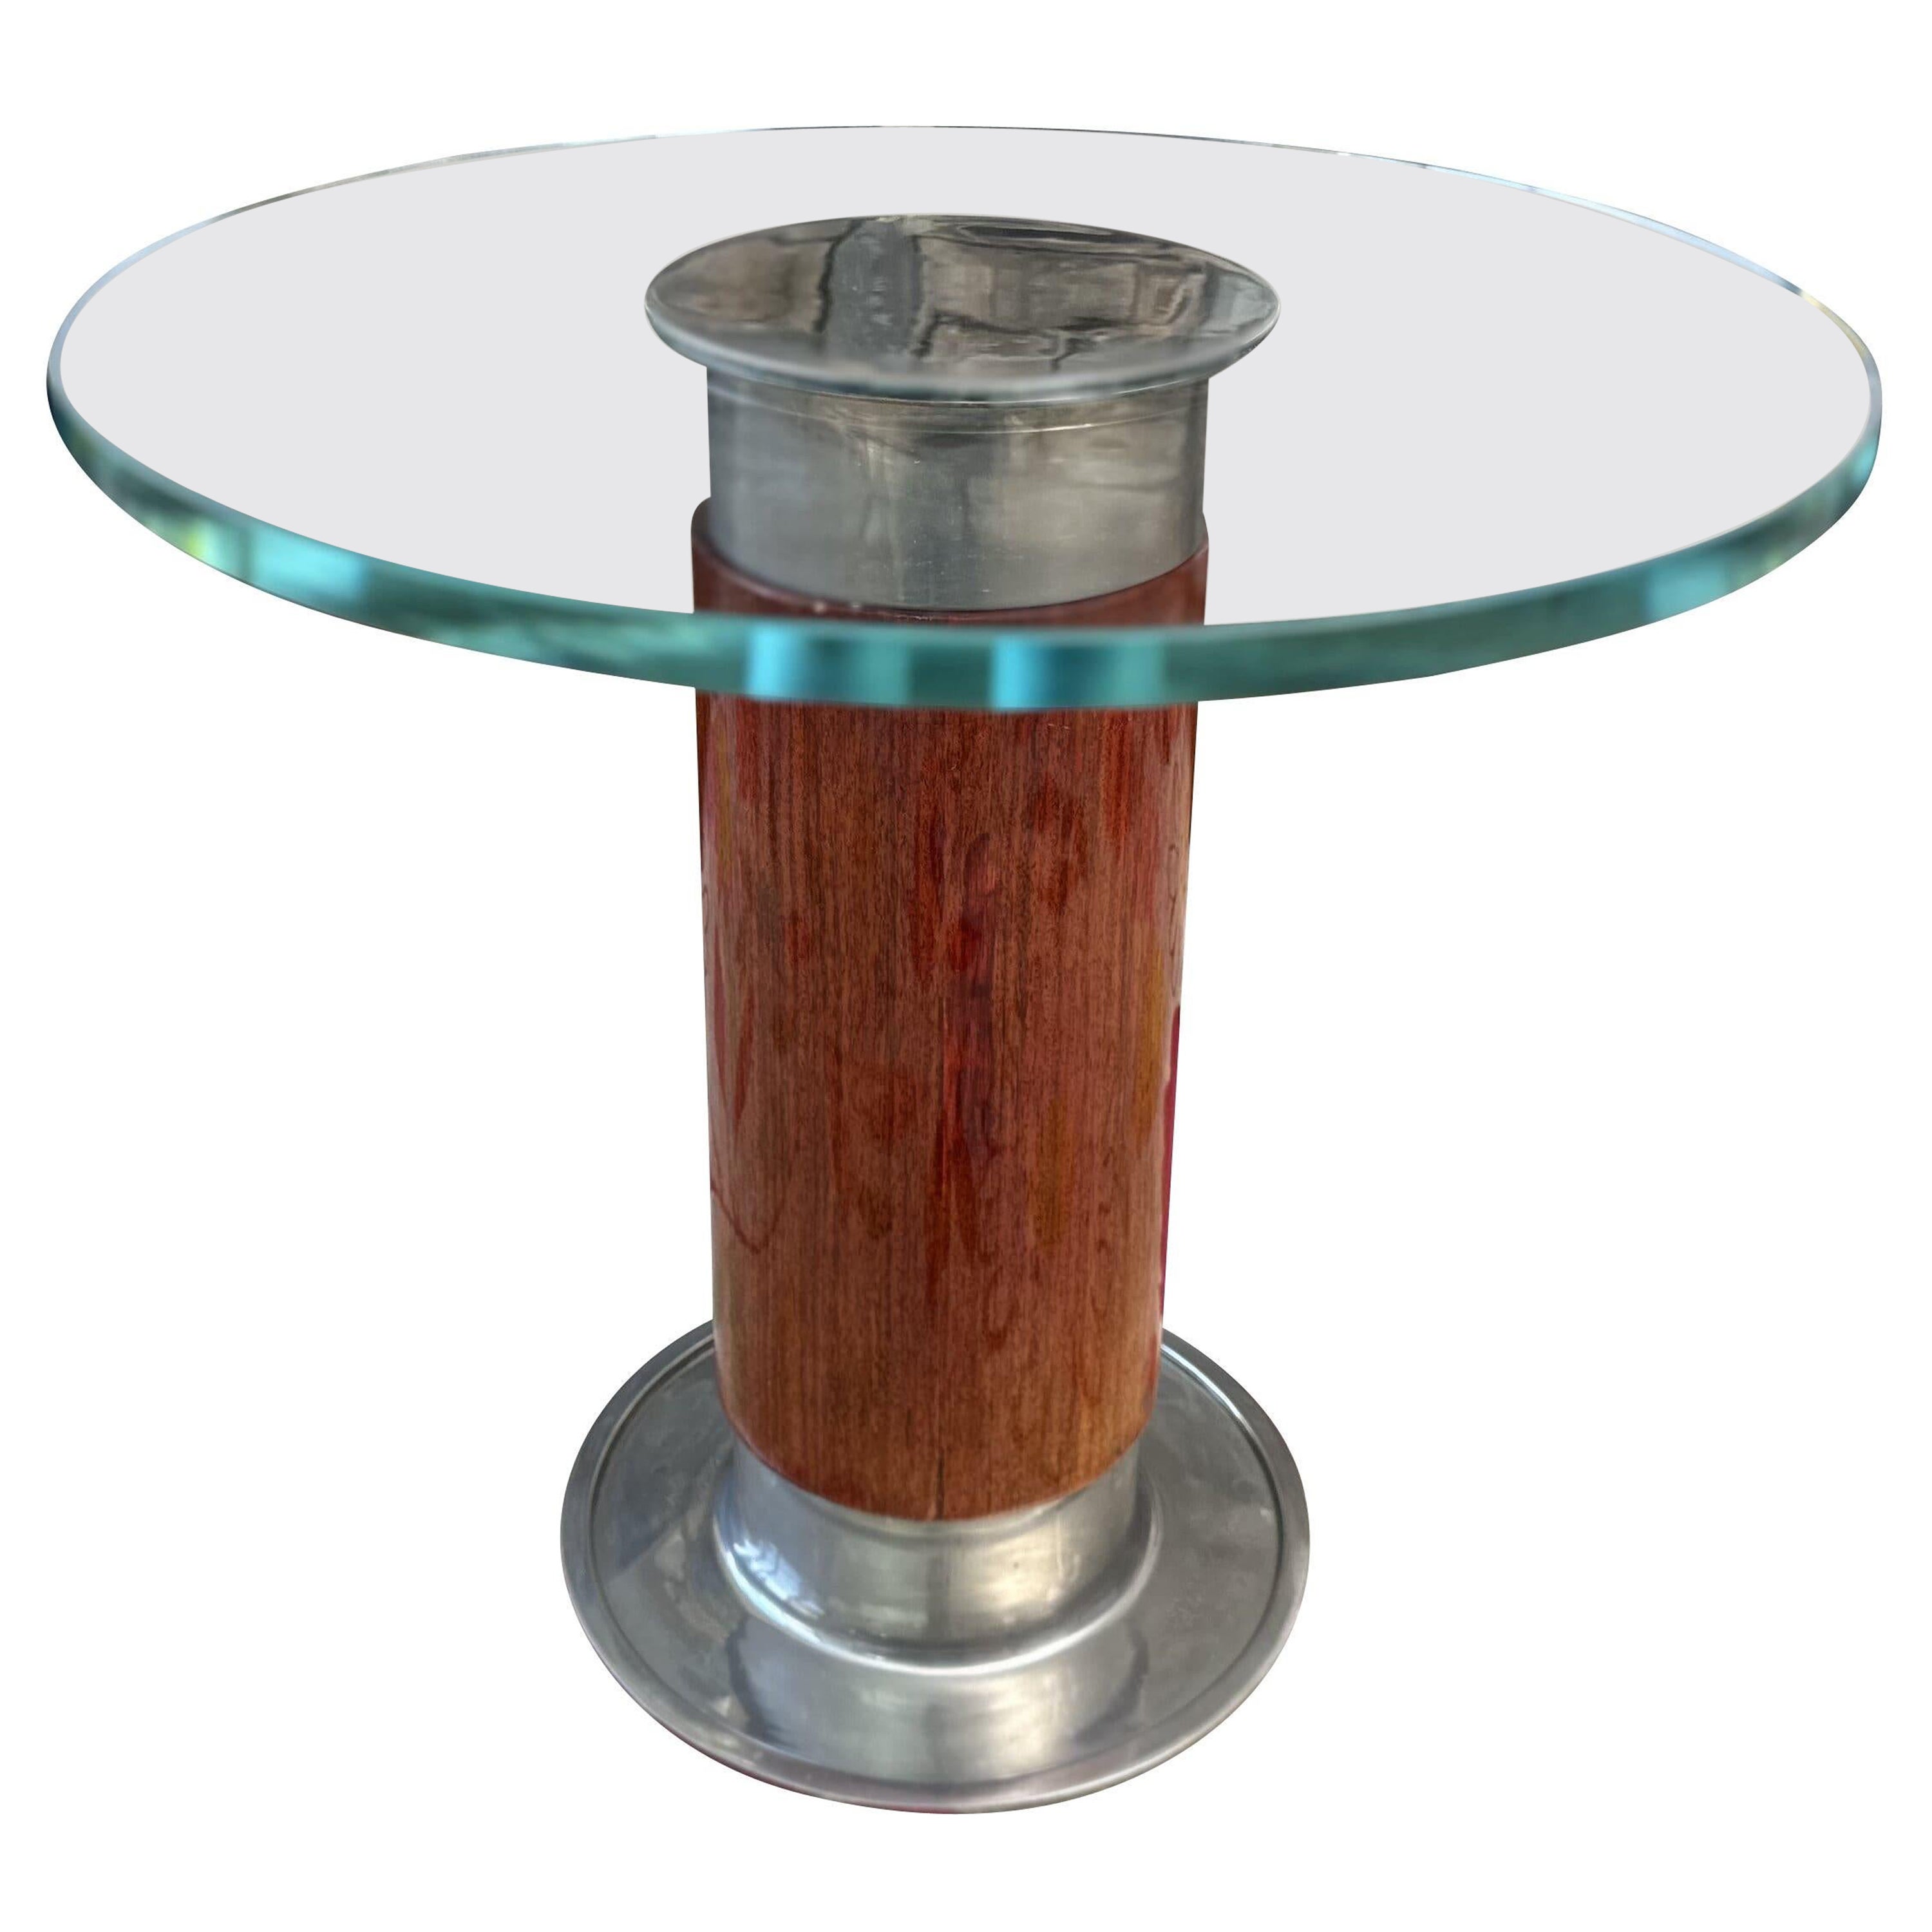 French Art Deco Rosewood Chrome and Glass Guéridon side coffee table circa 1930